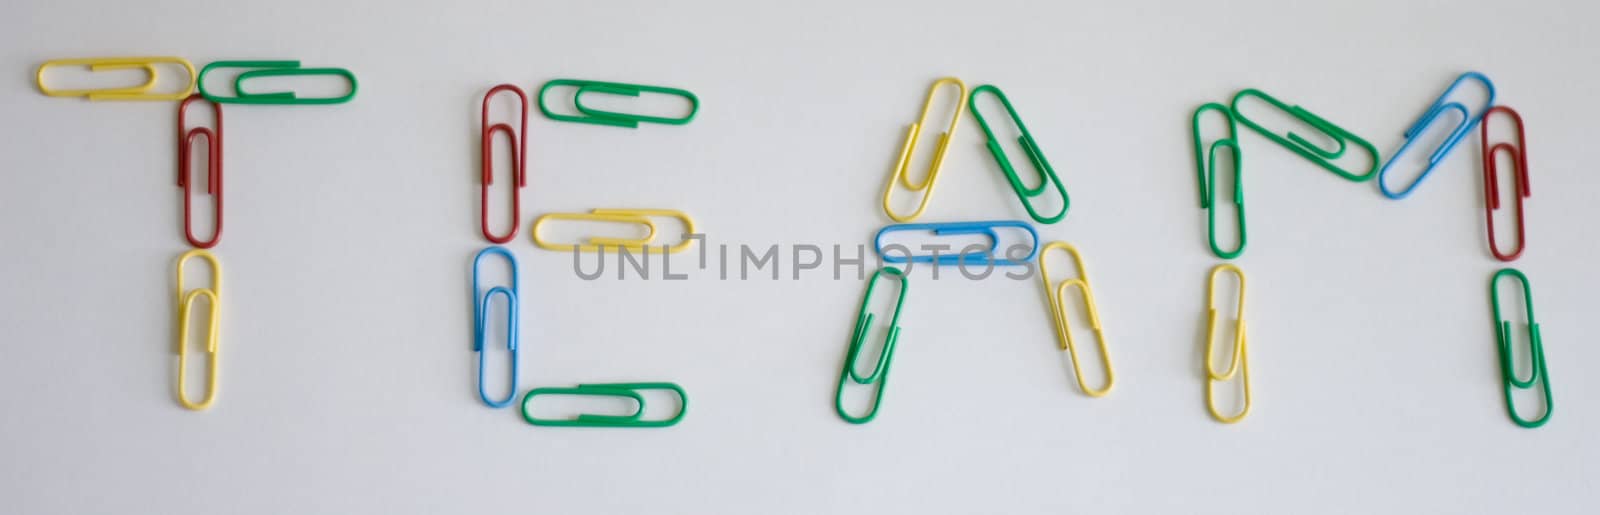 multi-color paper-clips by arhip4